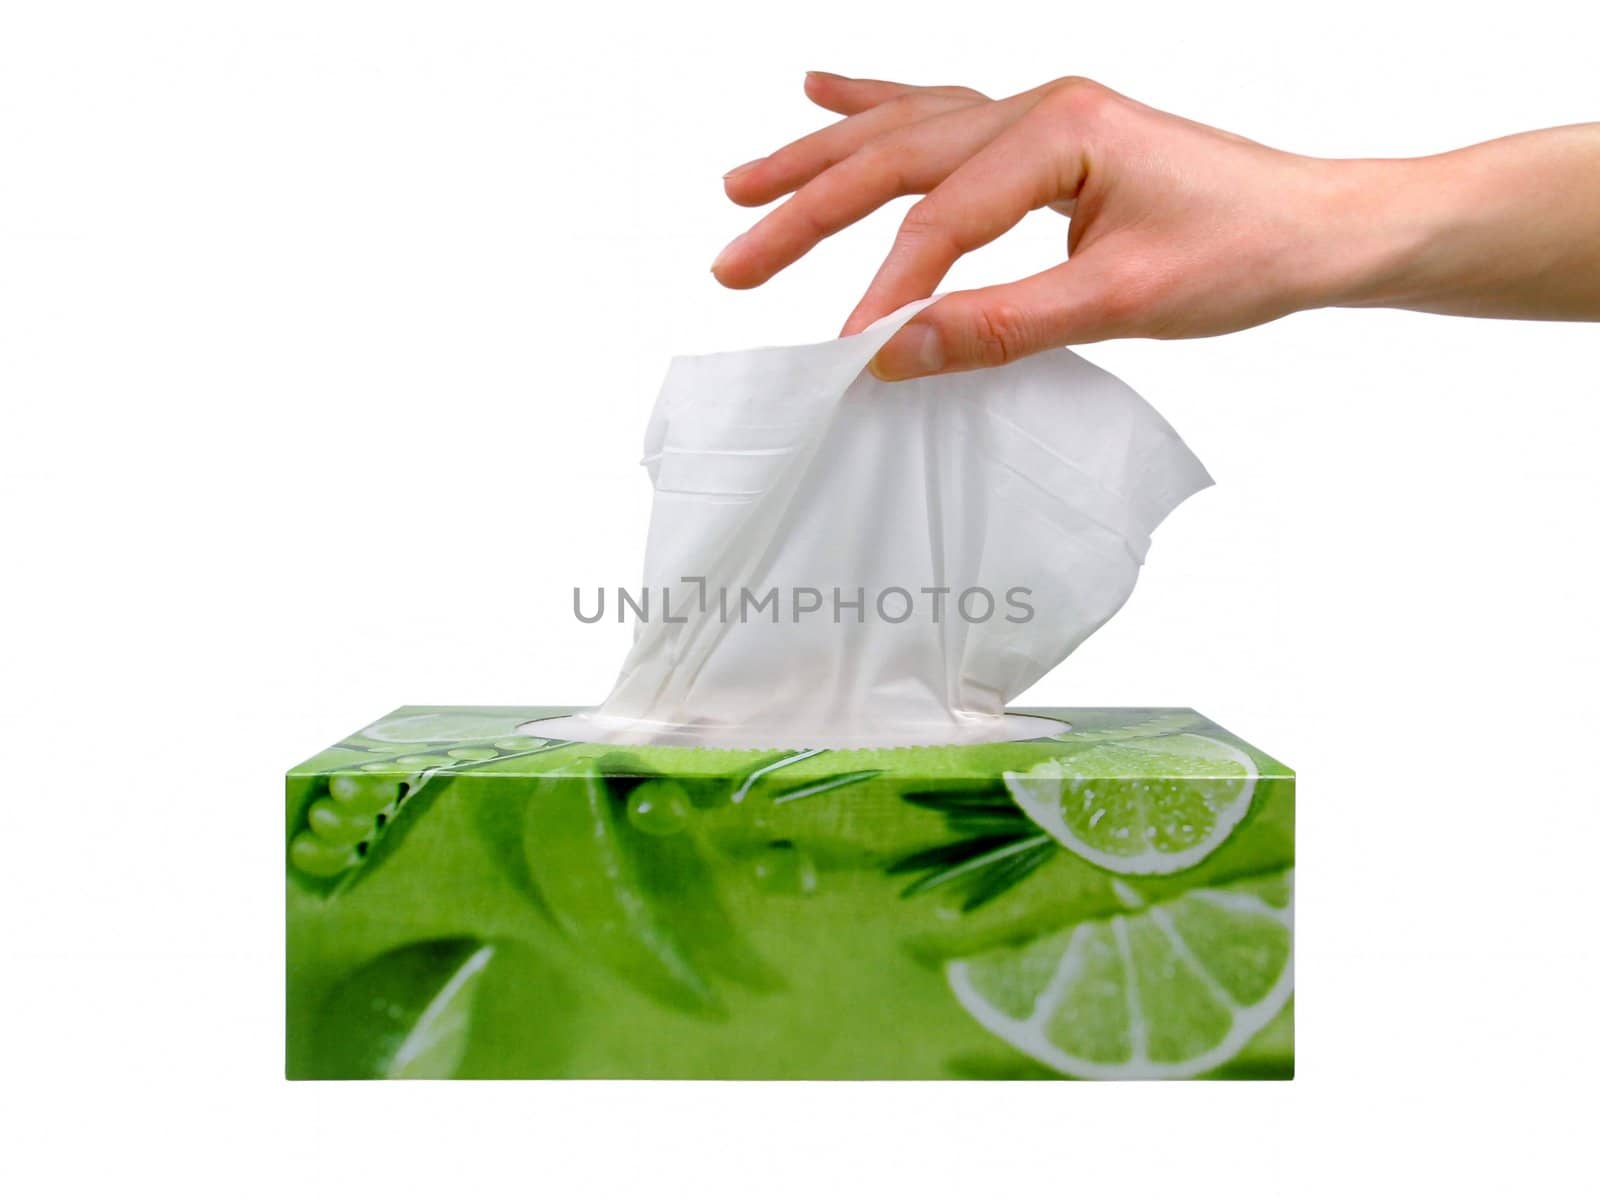 Delicate woman�s hand pulls a tissue from a green tissue box.